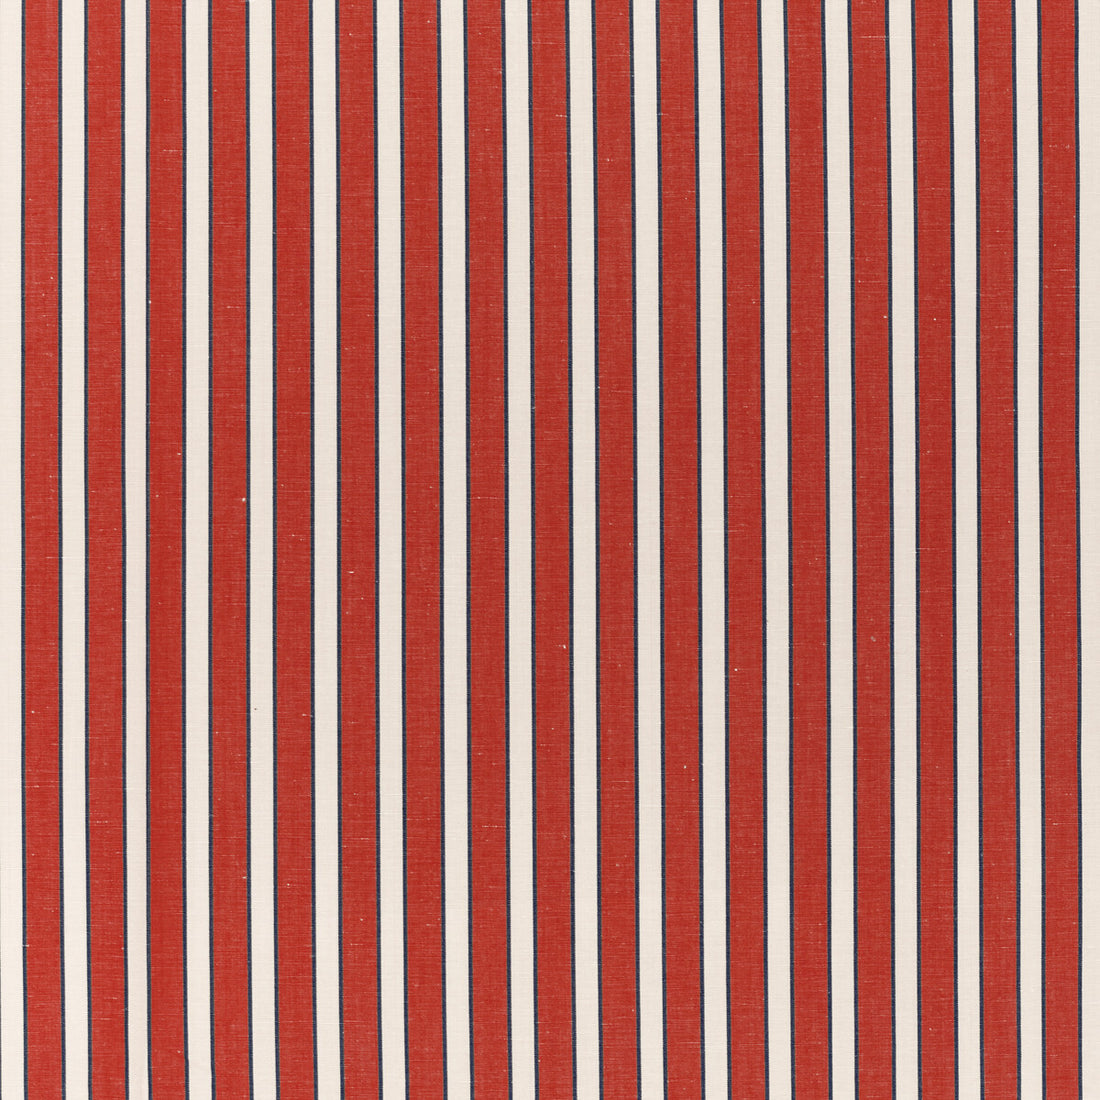 Rouen Stripe fabric in red color - pattern 8022117.195.0 - by Brunschwig &amp; Fils in the Normant Checks And Stripes II collection